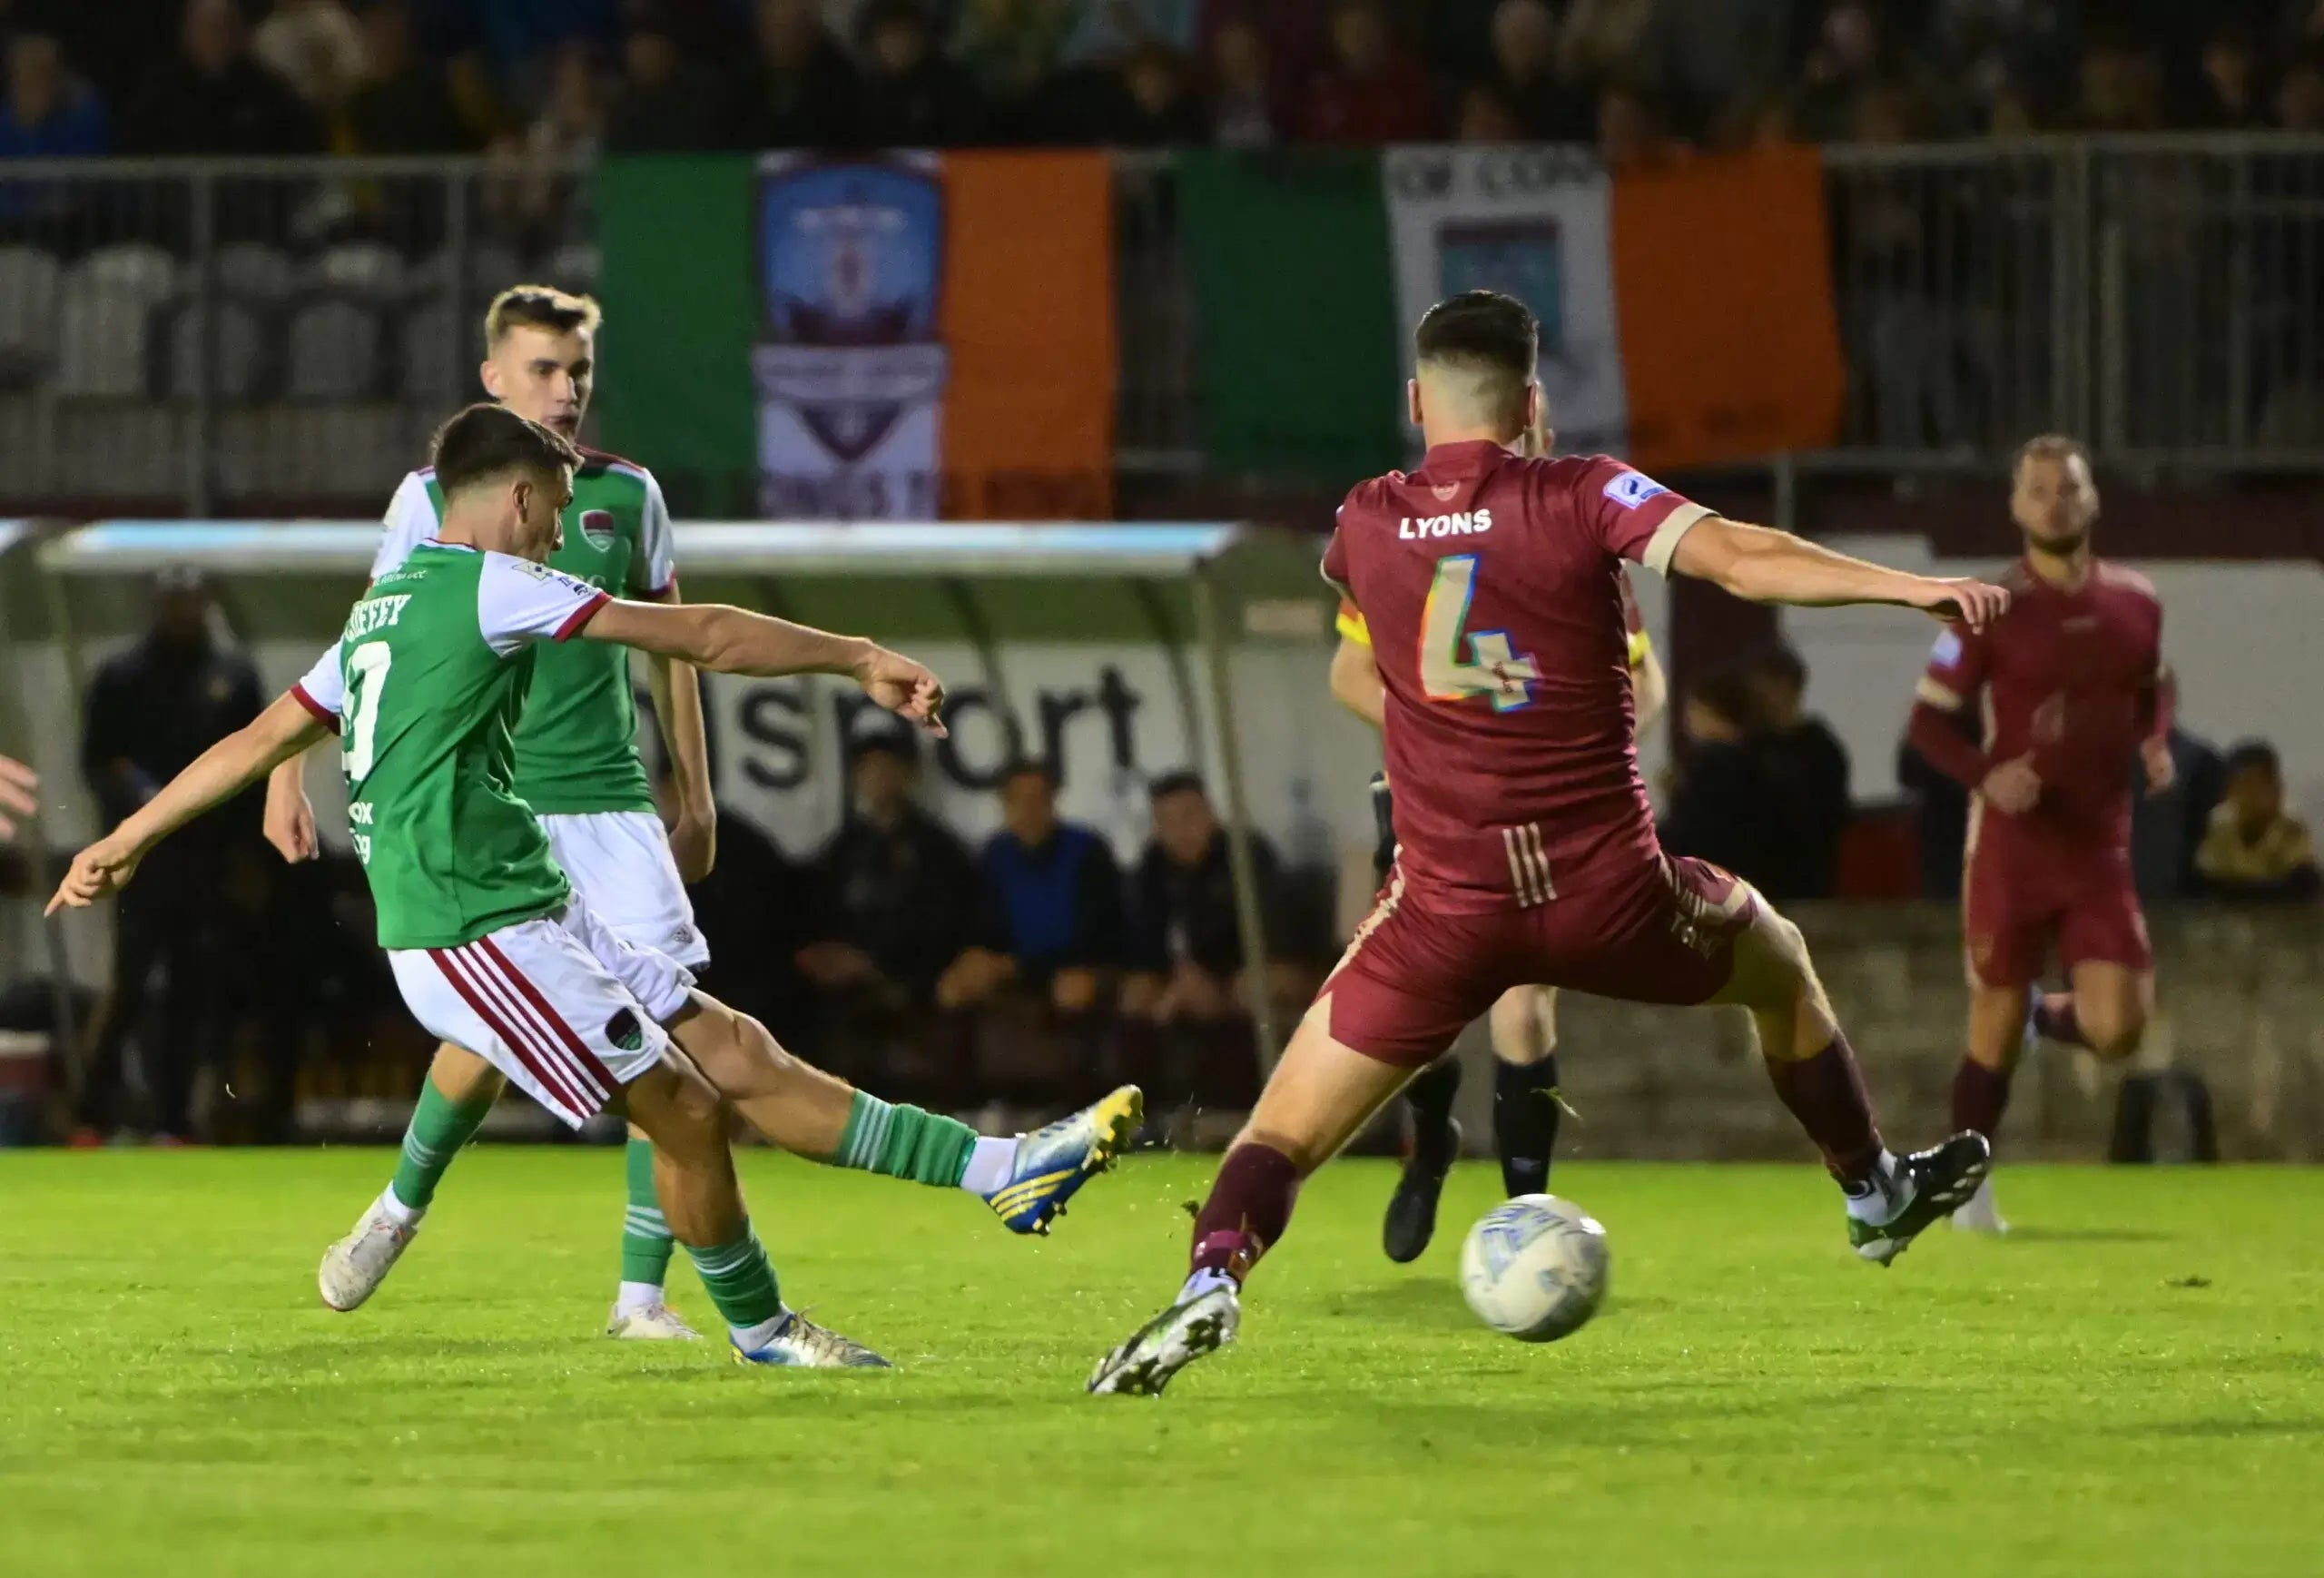 Galway 2-1 City